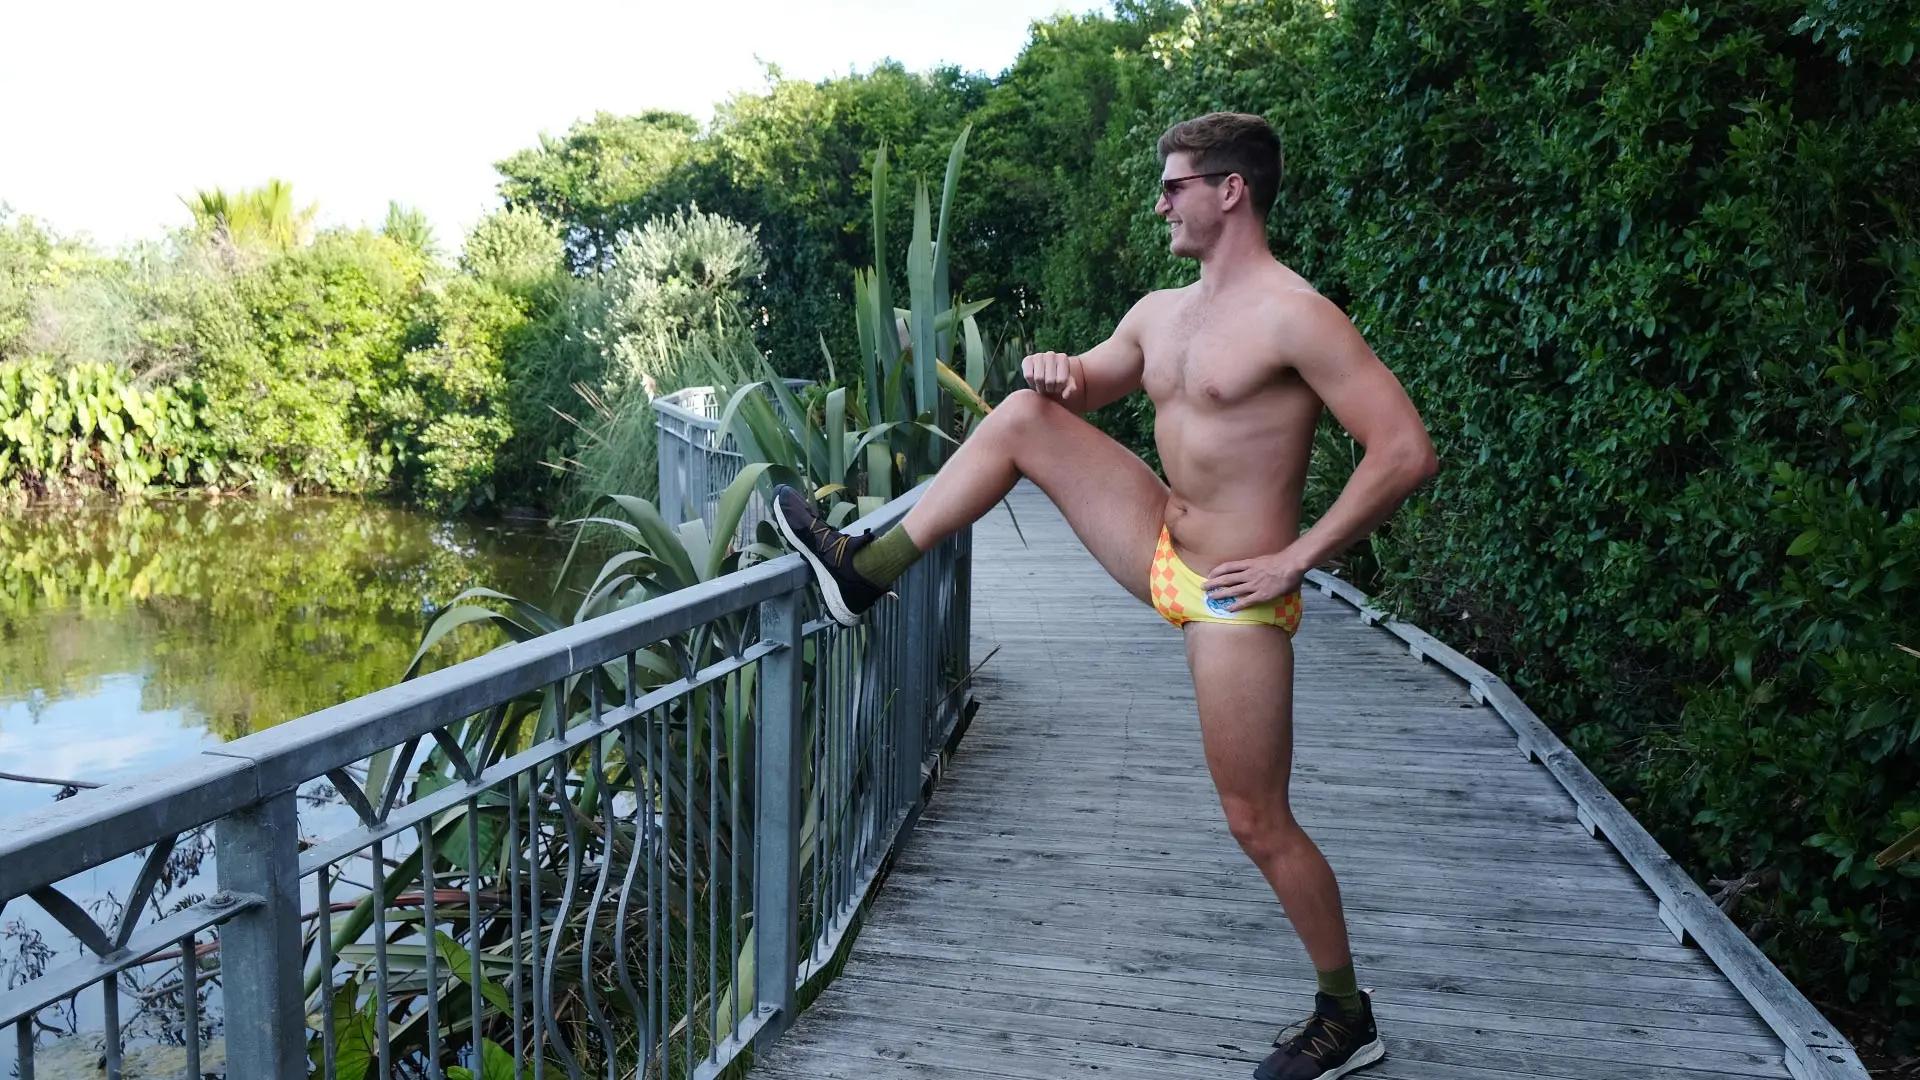 Athletic young man stretching while wearing astonishingly bright speedos